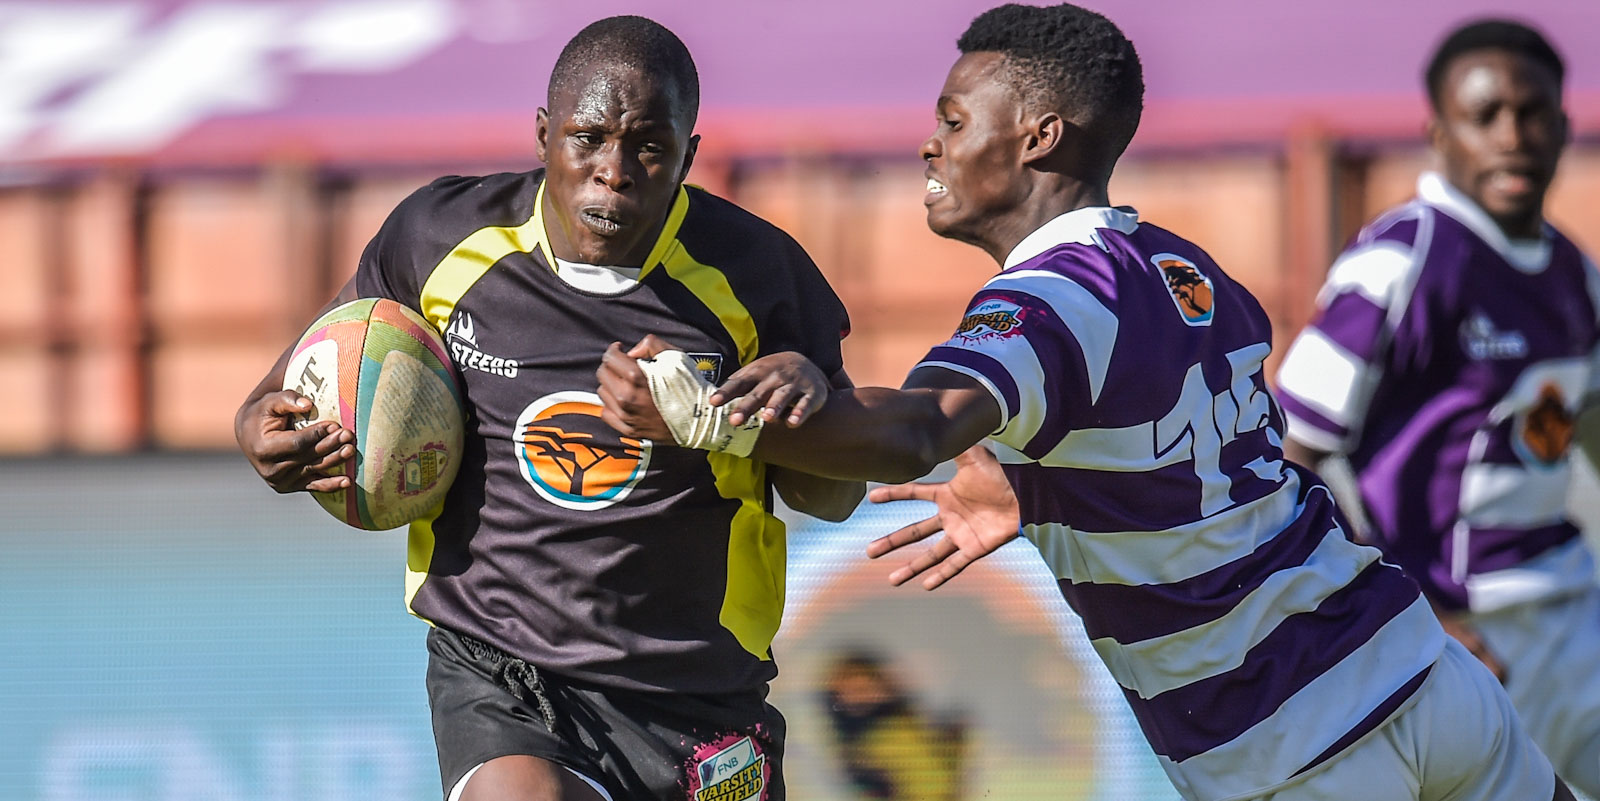 Fort Hare had the better of their Eastern Cape opponents from Rhodes.